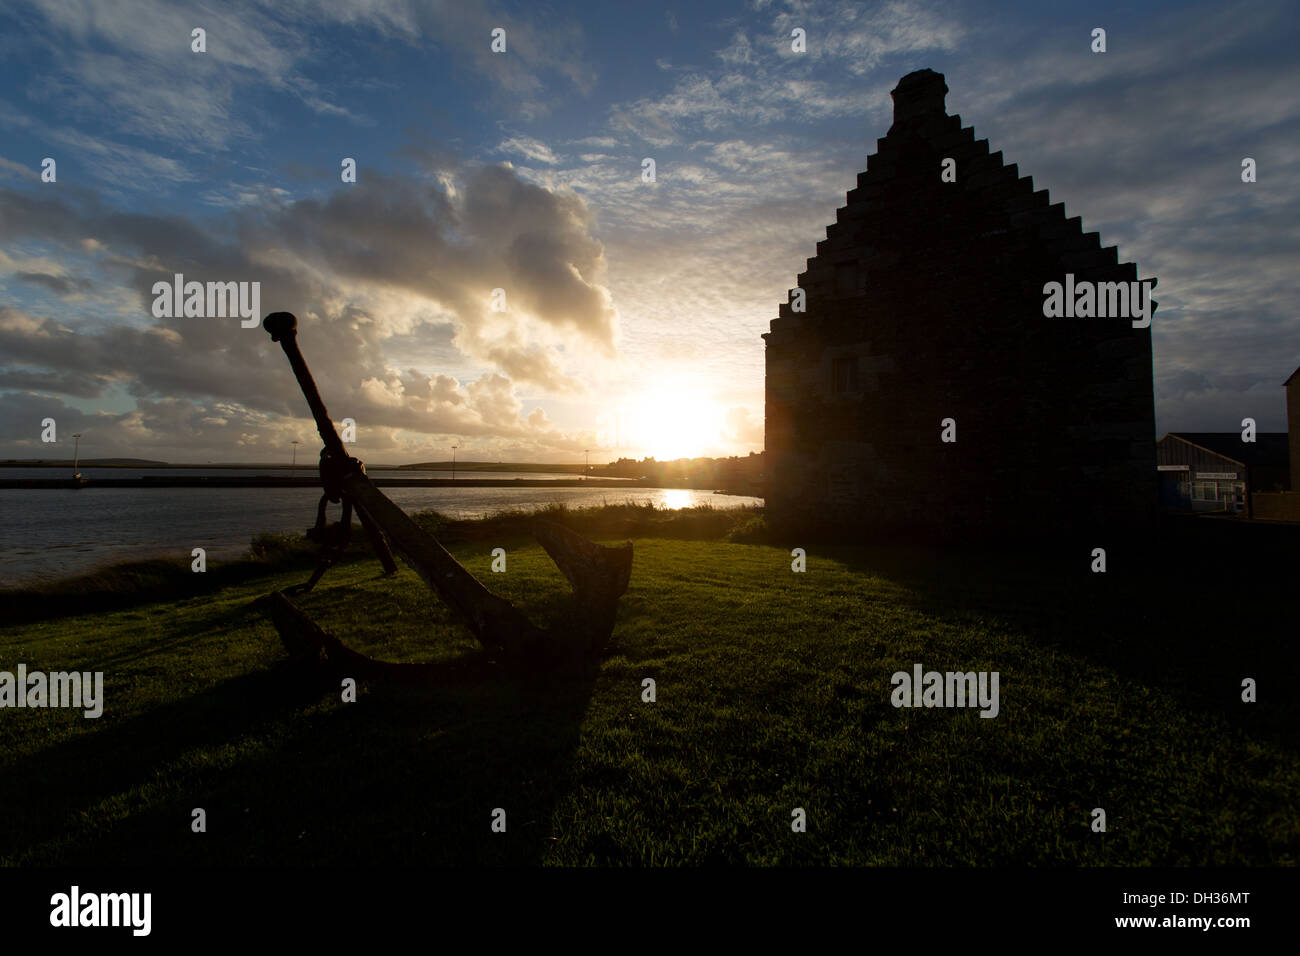 Islands of Orkney, Scotland. Dusk view of the late 17th century Store House at Holm on the east of Orkney’s island of Mainland. Stock Photo